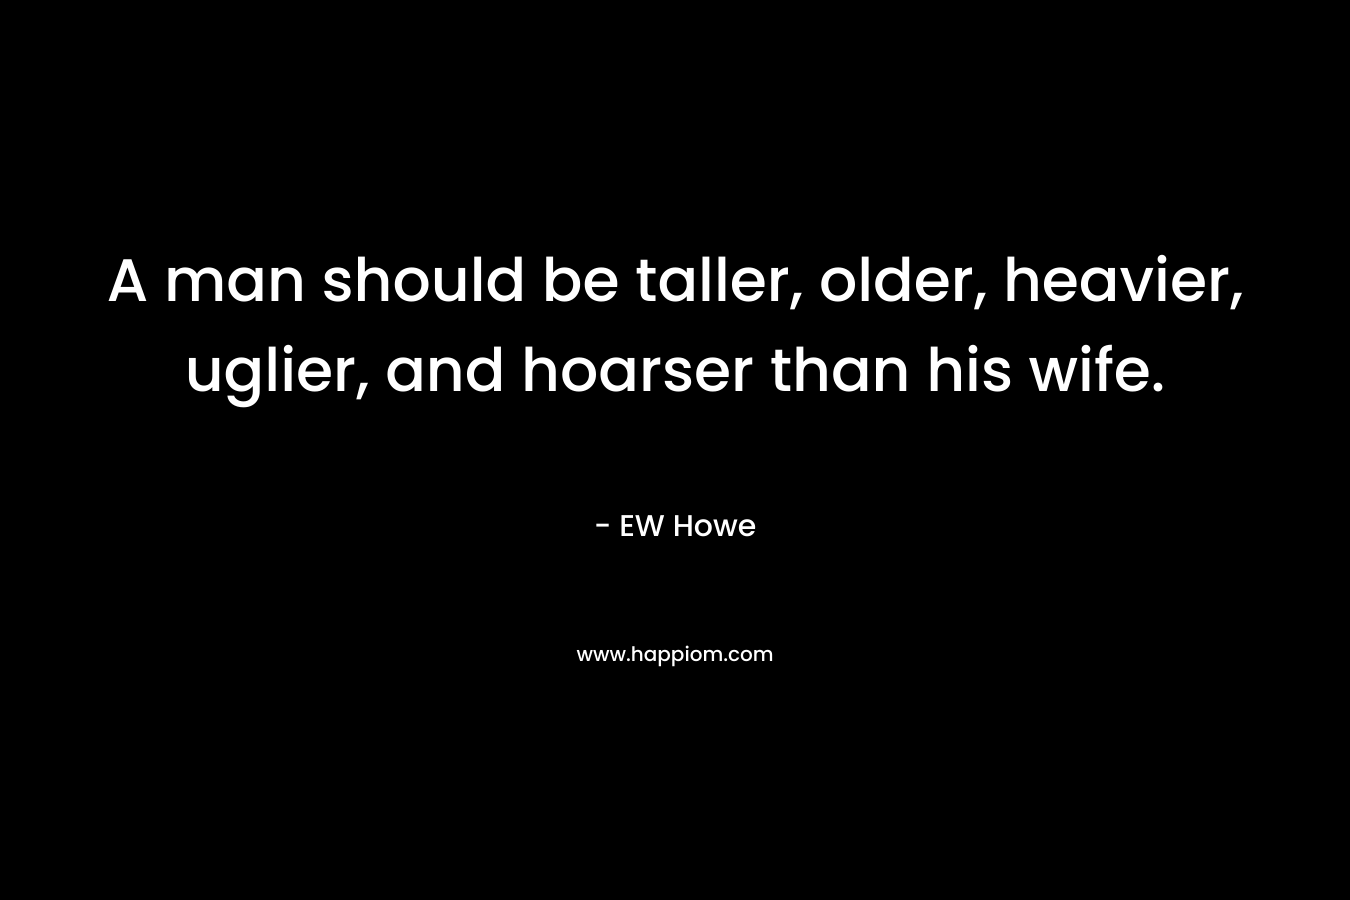 A man should be taller, older, heavier, uglier, and hoarser than his wife. – EW Howe